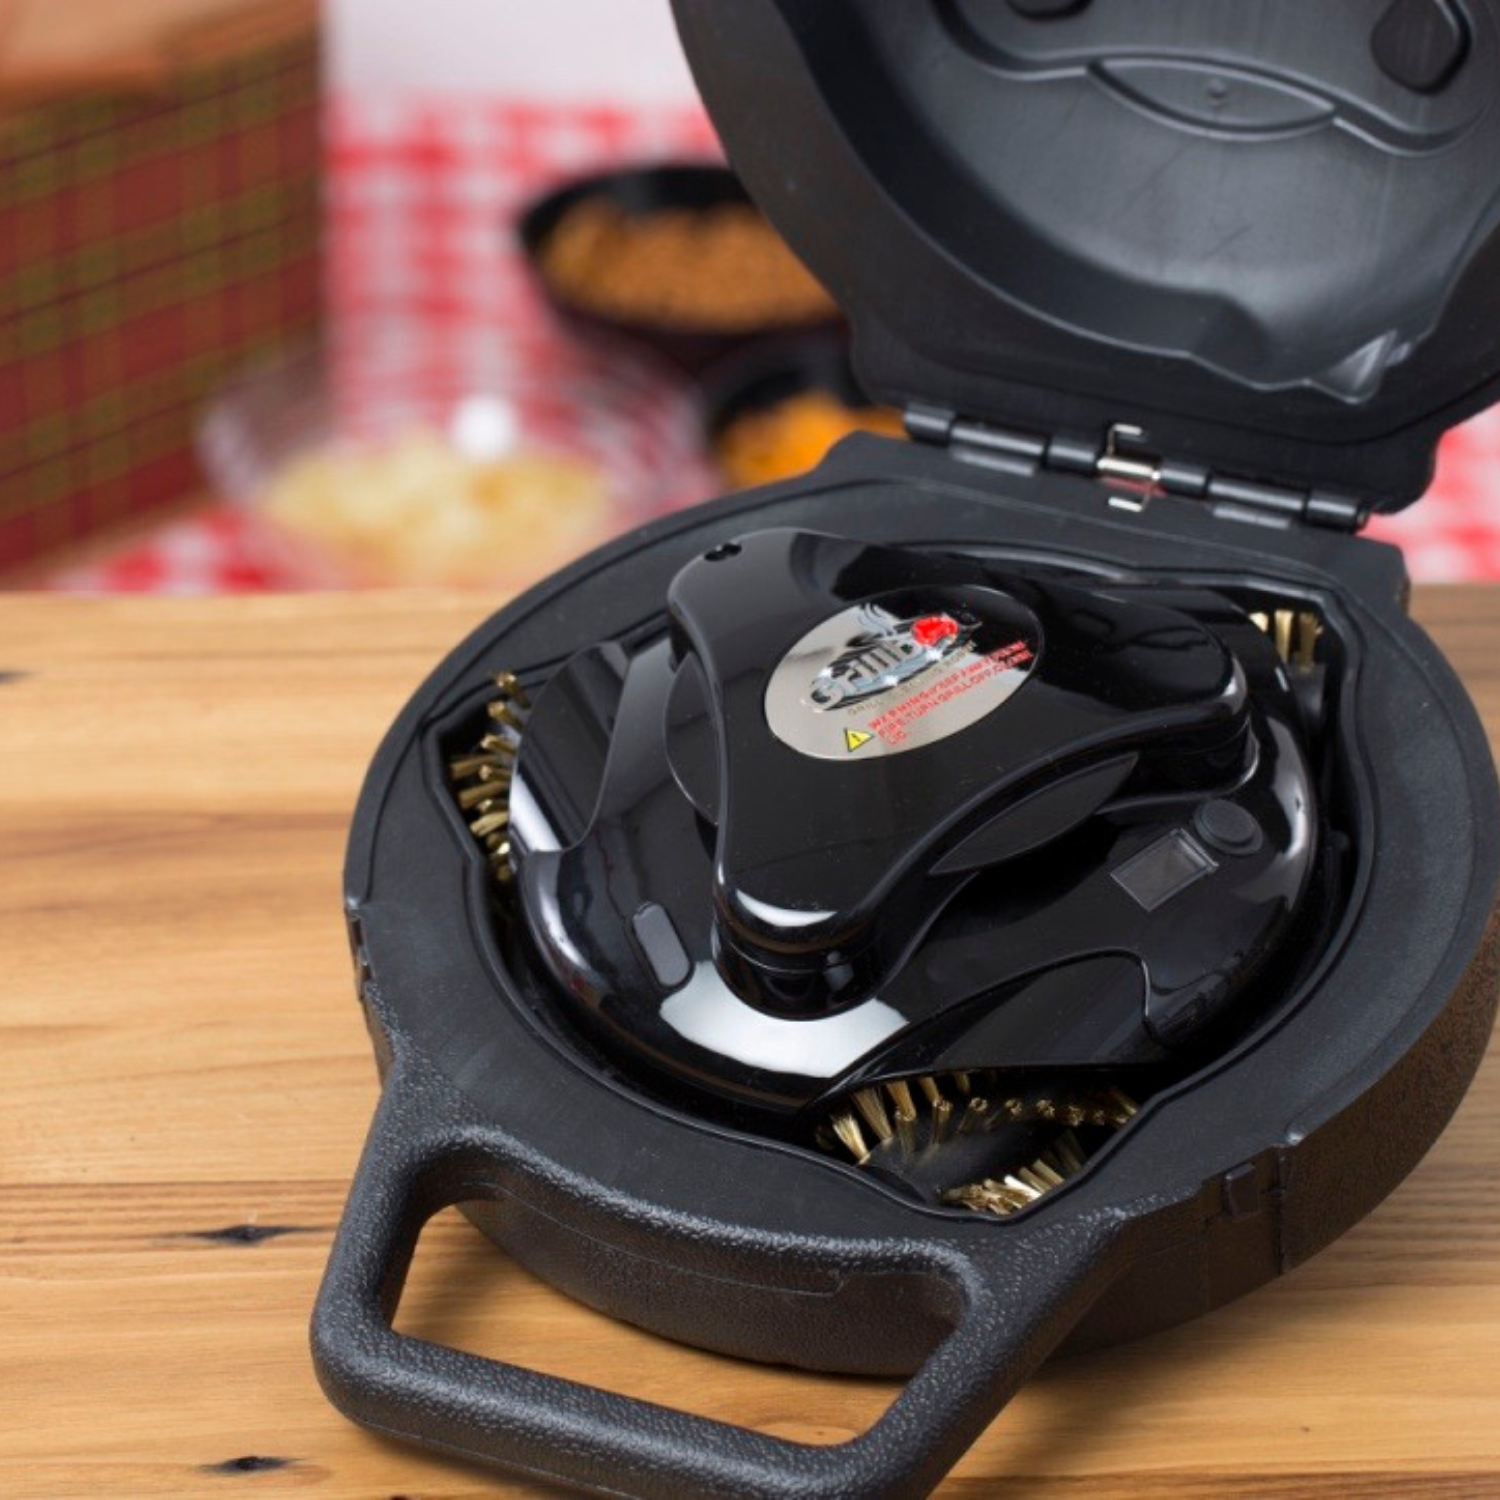 I Tried Grillbot, the Robot That Cleans Your Grill, and Was